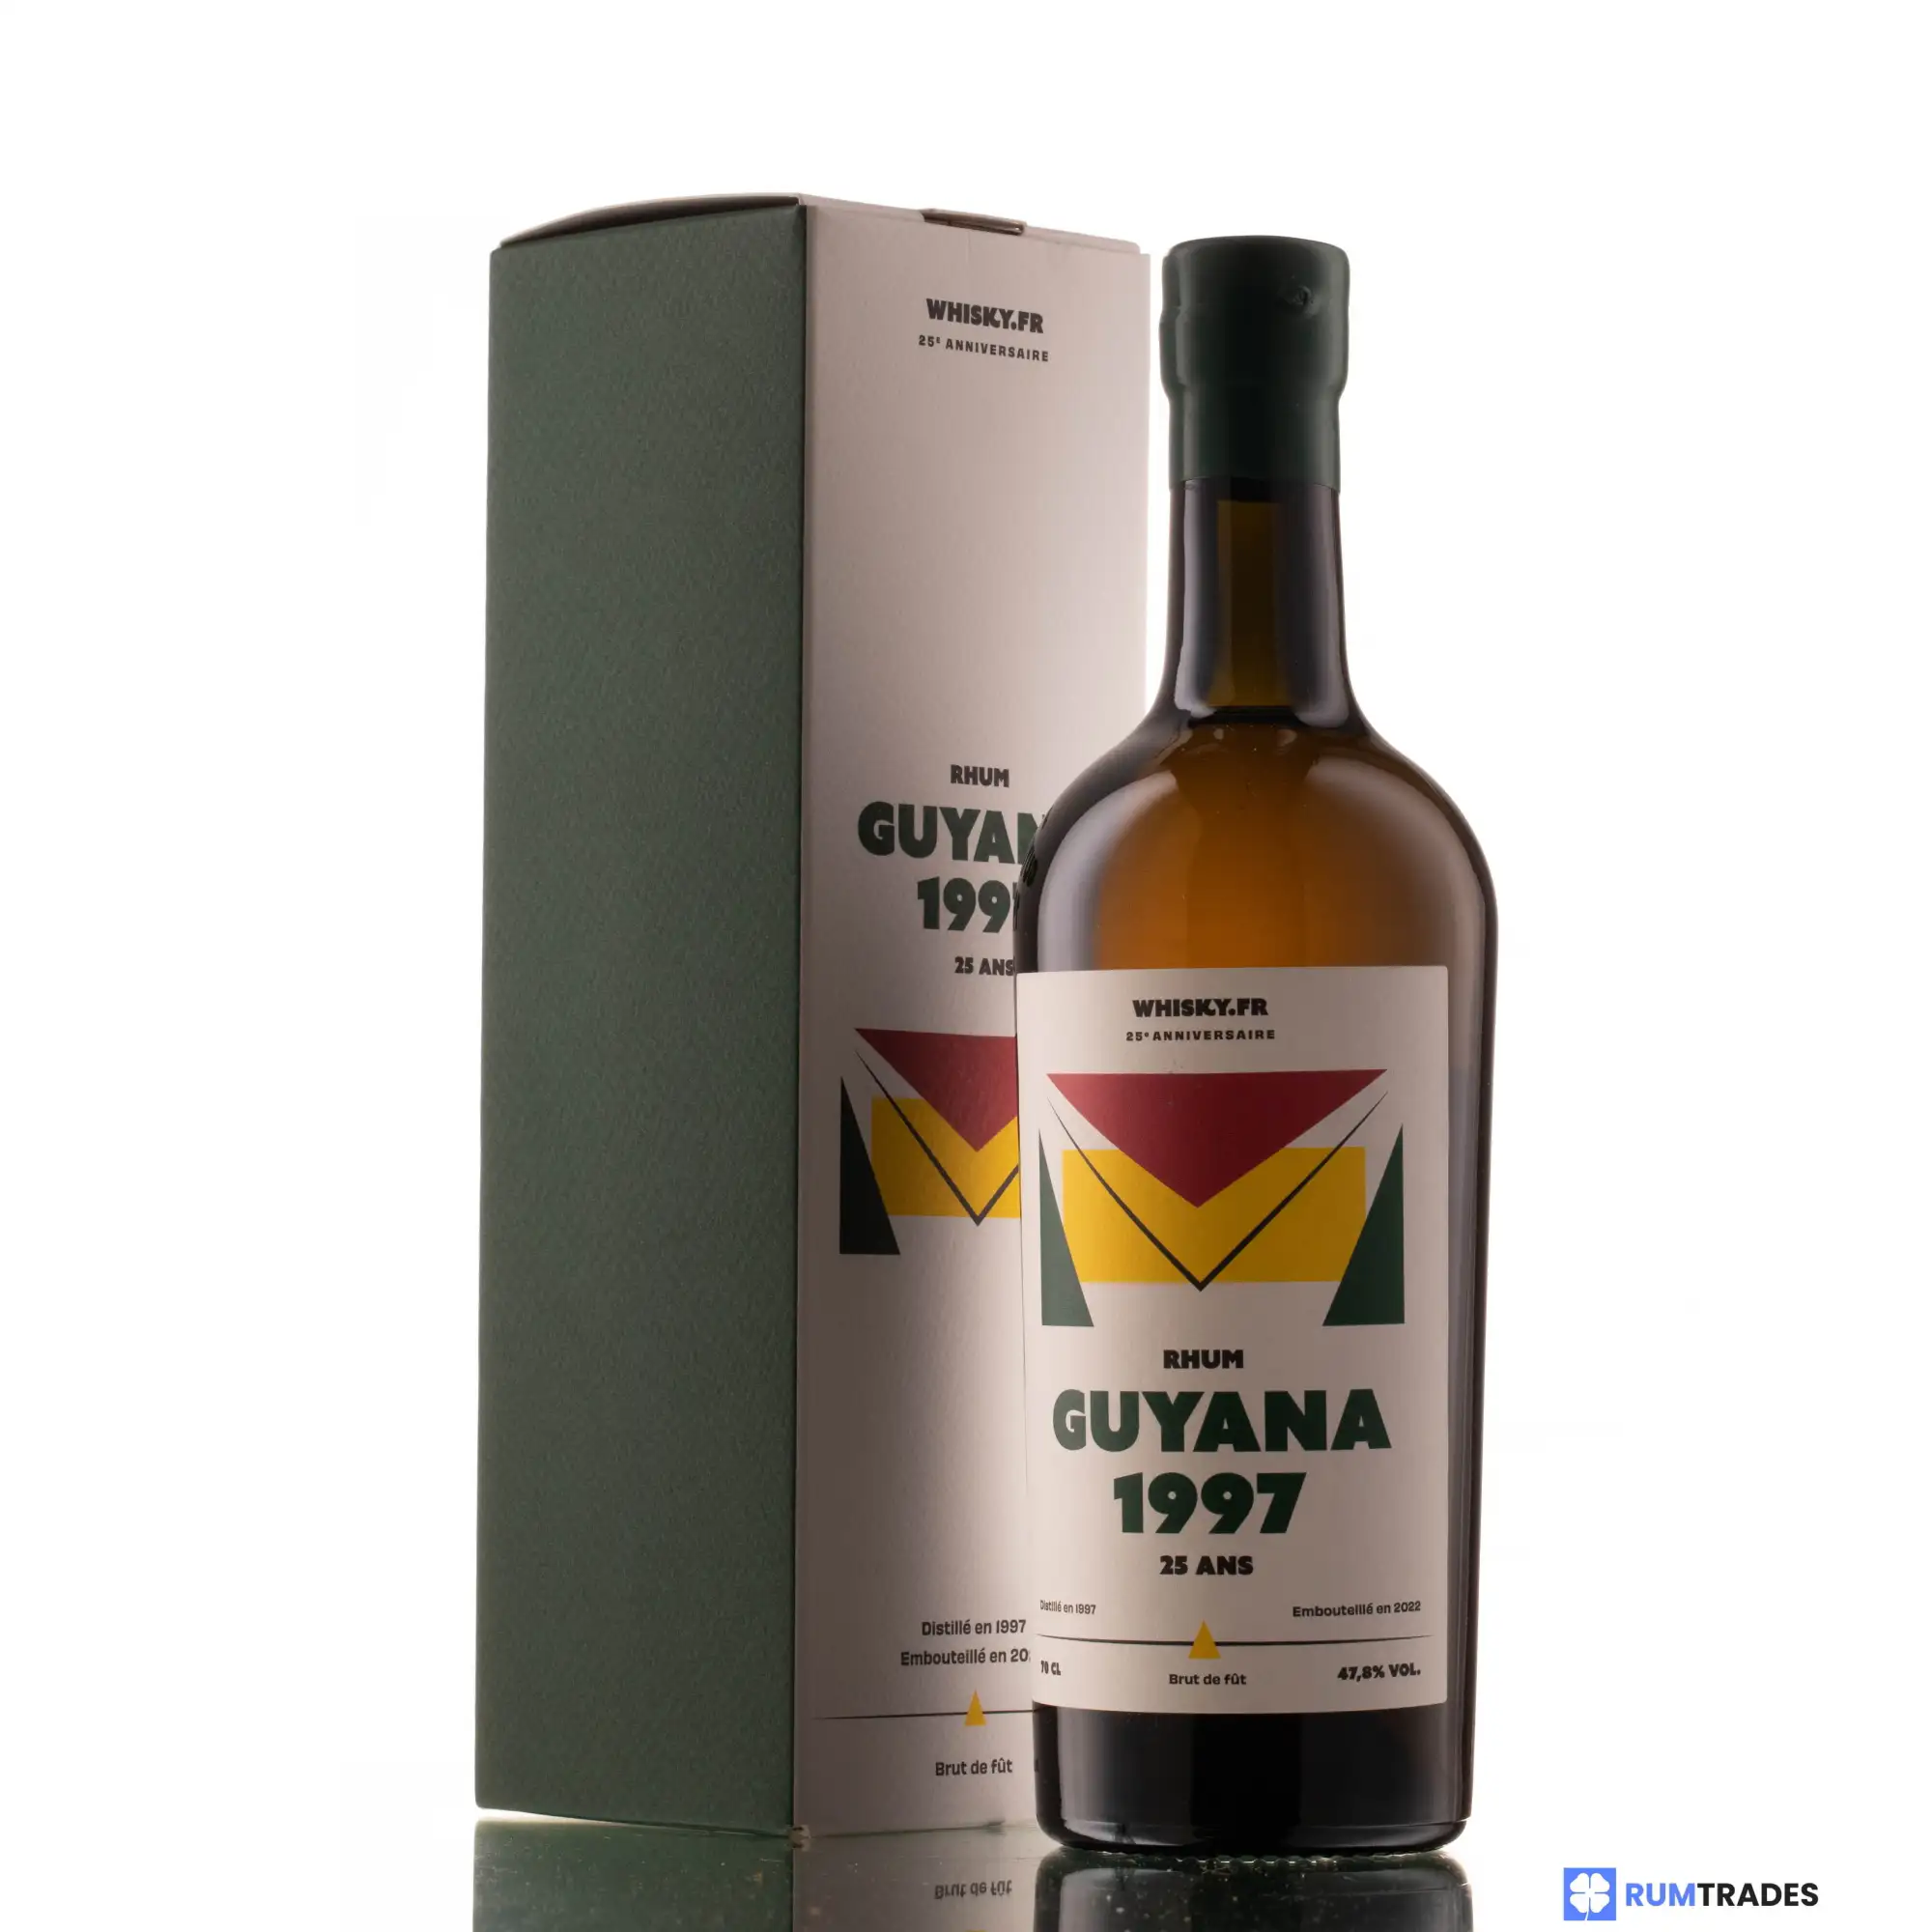 Image of the front of the bottle of the rum Guyana (Whisky.fr 25th Anniversary)